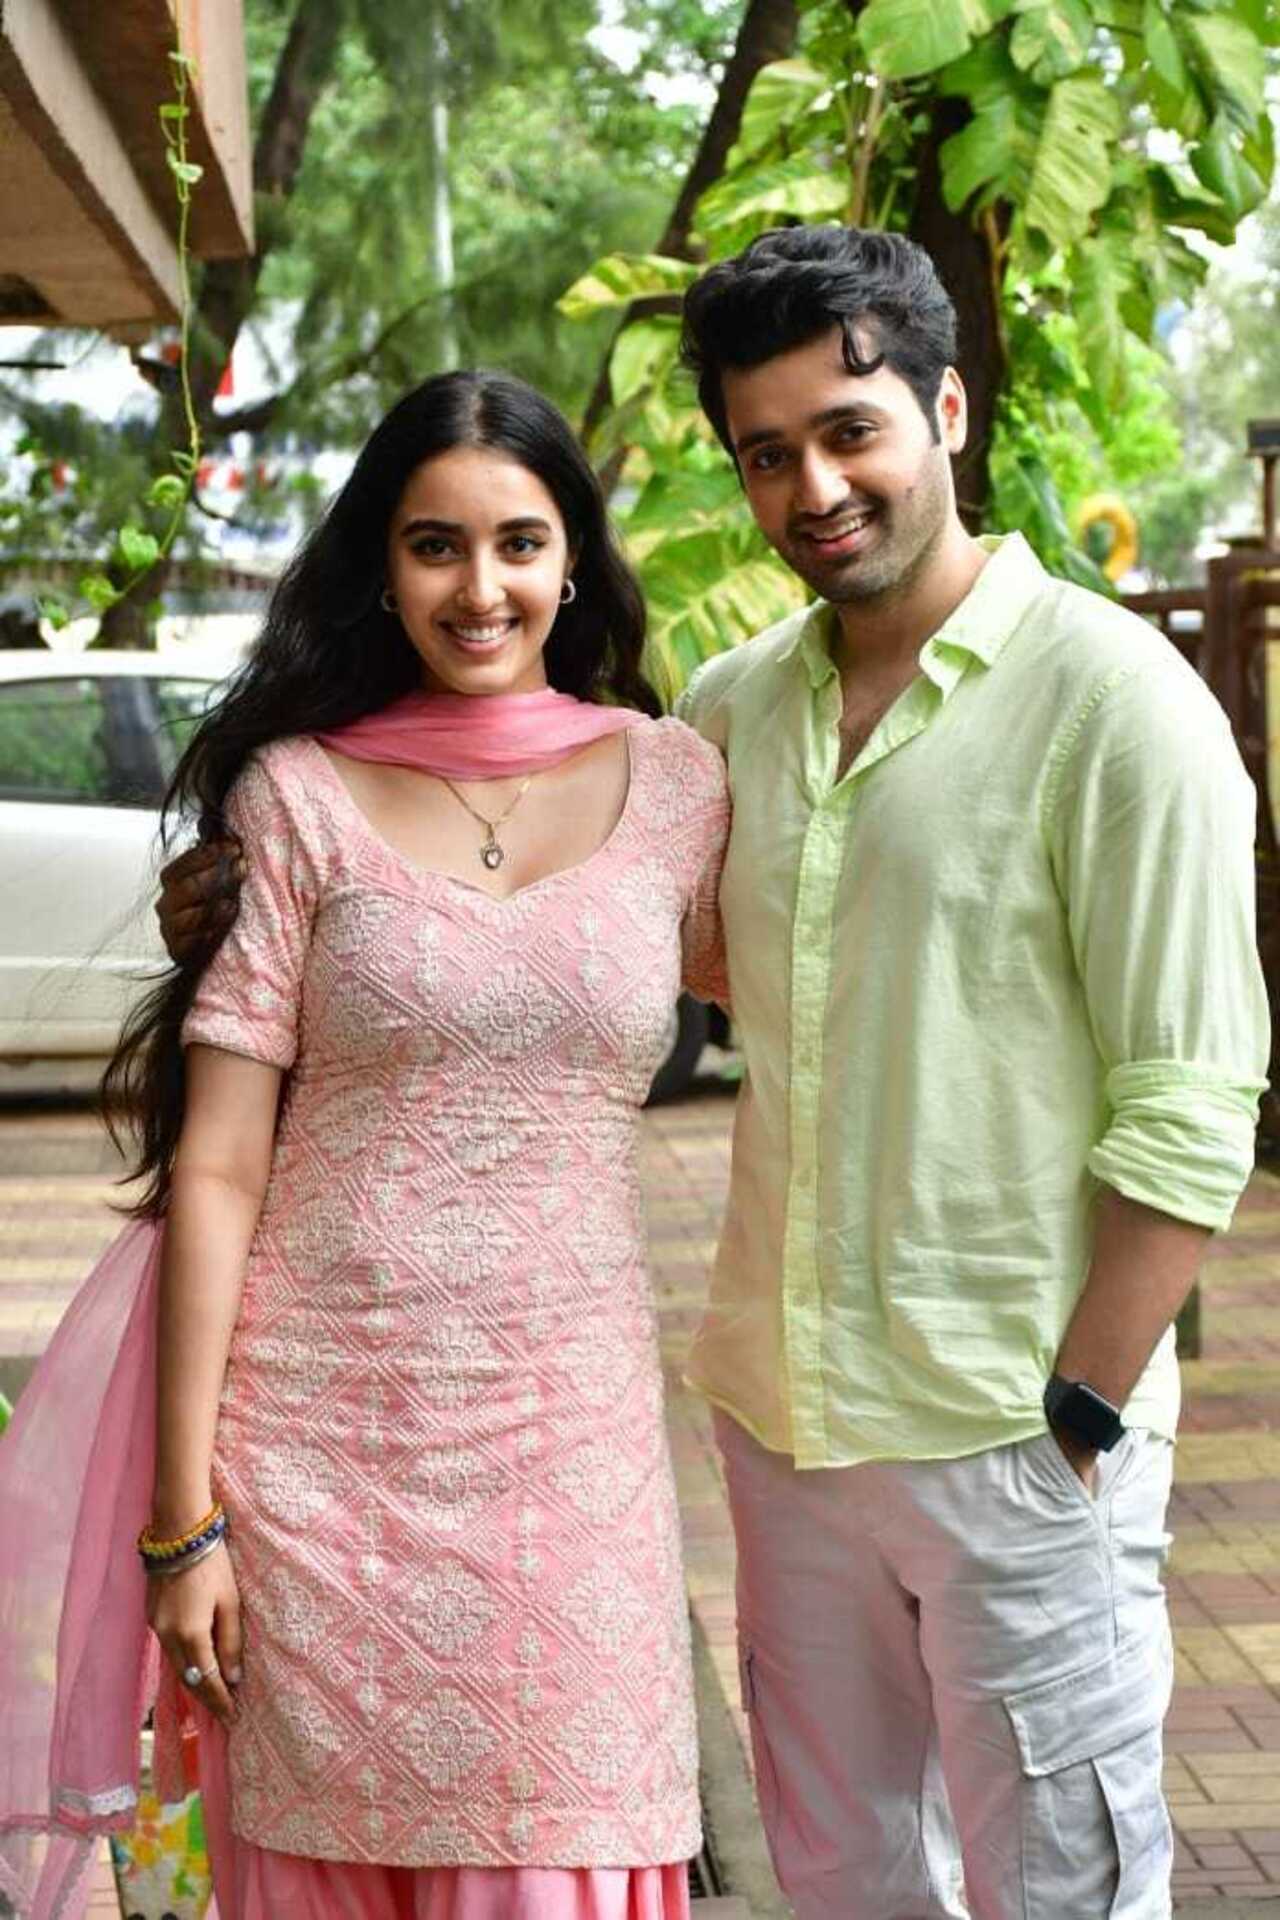 Simrat Kaur and Utkarsh Sharma were spotted in the city promoting their upcoming film 'Gadar 2'